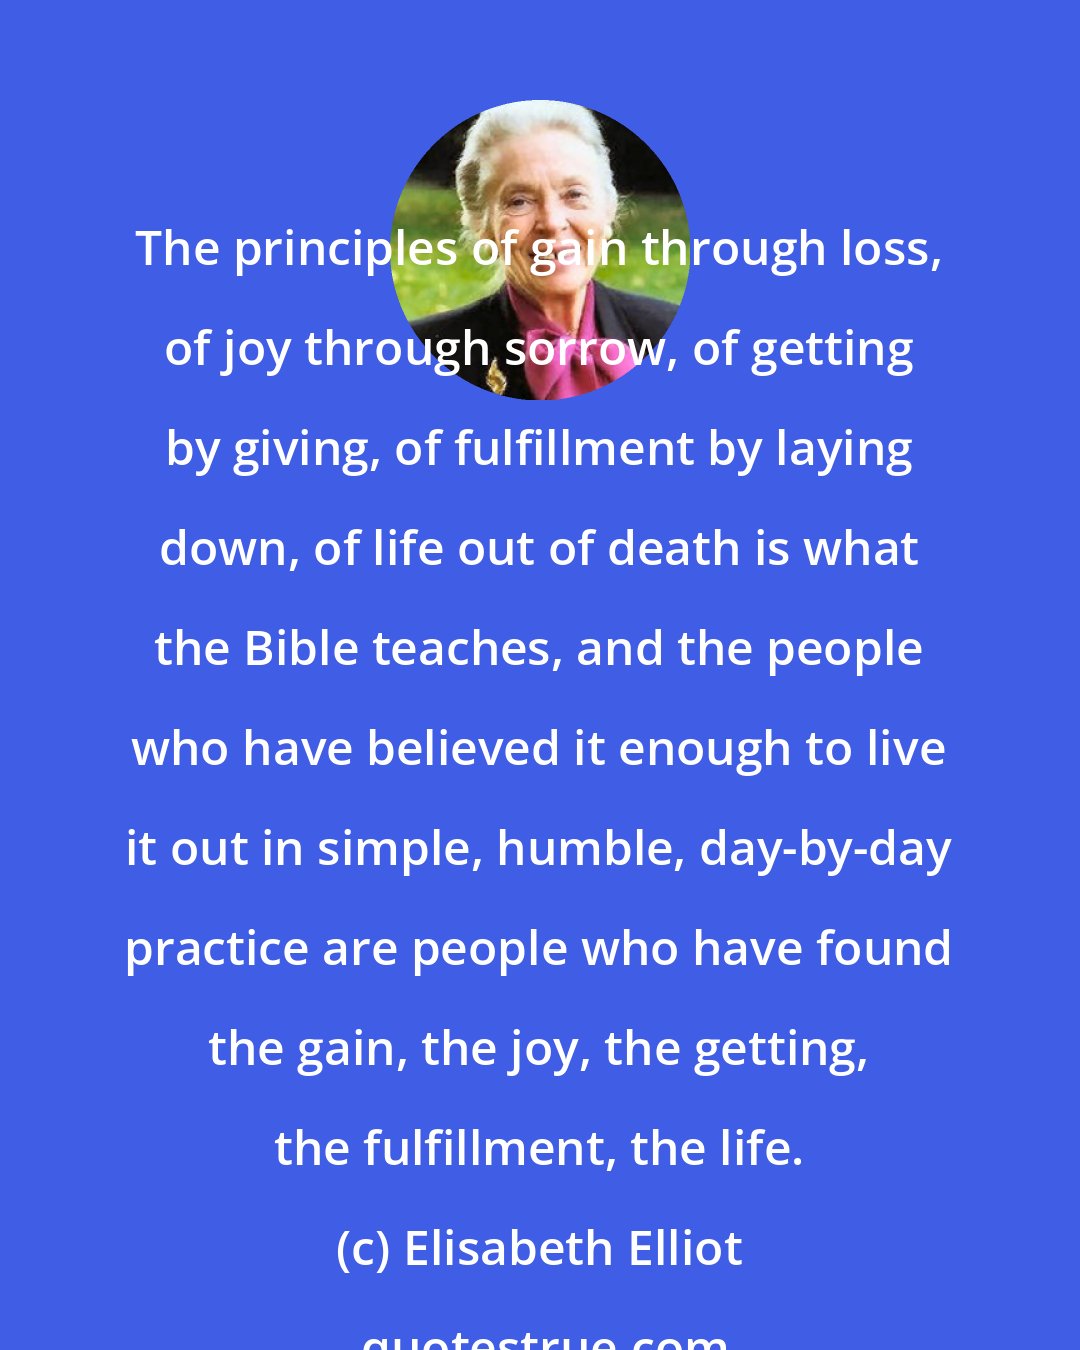 Elisabeth Elliot: The principles of gain through loss, of joy through sorrow, of getting by giving, of fulfillment by laying down, of life out of death is what the Bible teaches, and the people who have believed it enough to live it out in simple, humble, day-by-day practice are people who have found the gain, the joy, the getting, the fulfillment, the life.